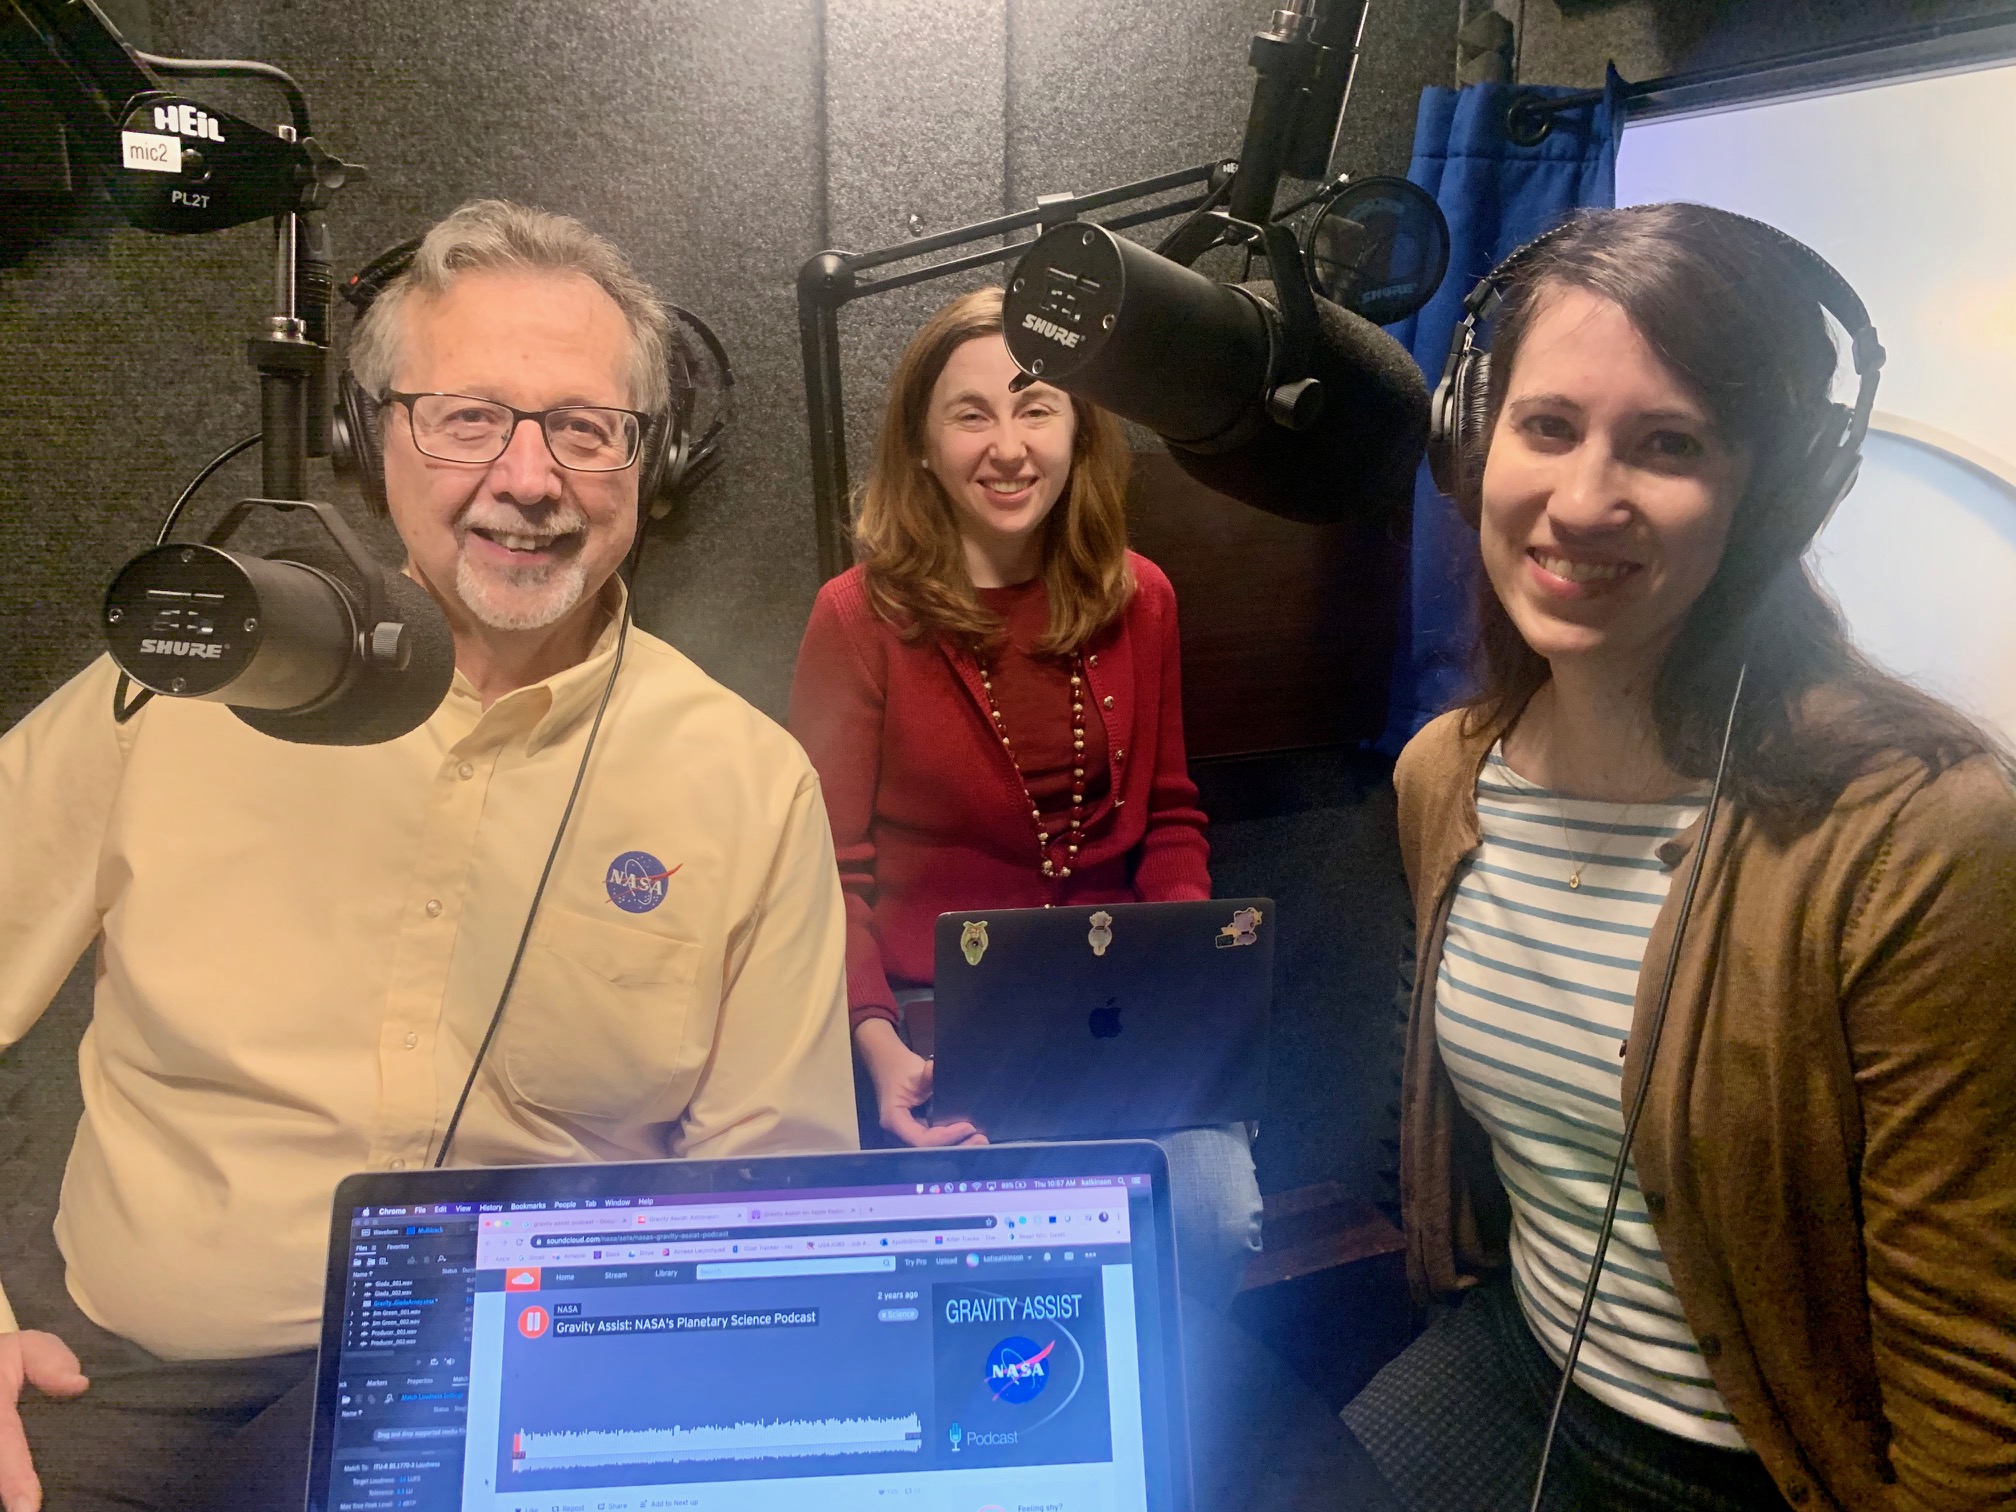 From left to right: NASA's chief scientist Jim Green, Gravity Assist producer Elizabeth Landau, and astrophysicist Giada Arney. 